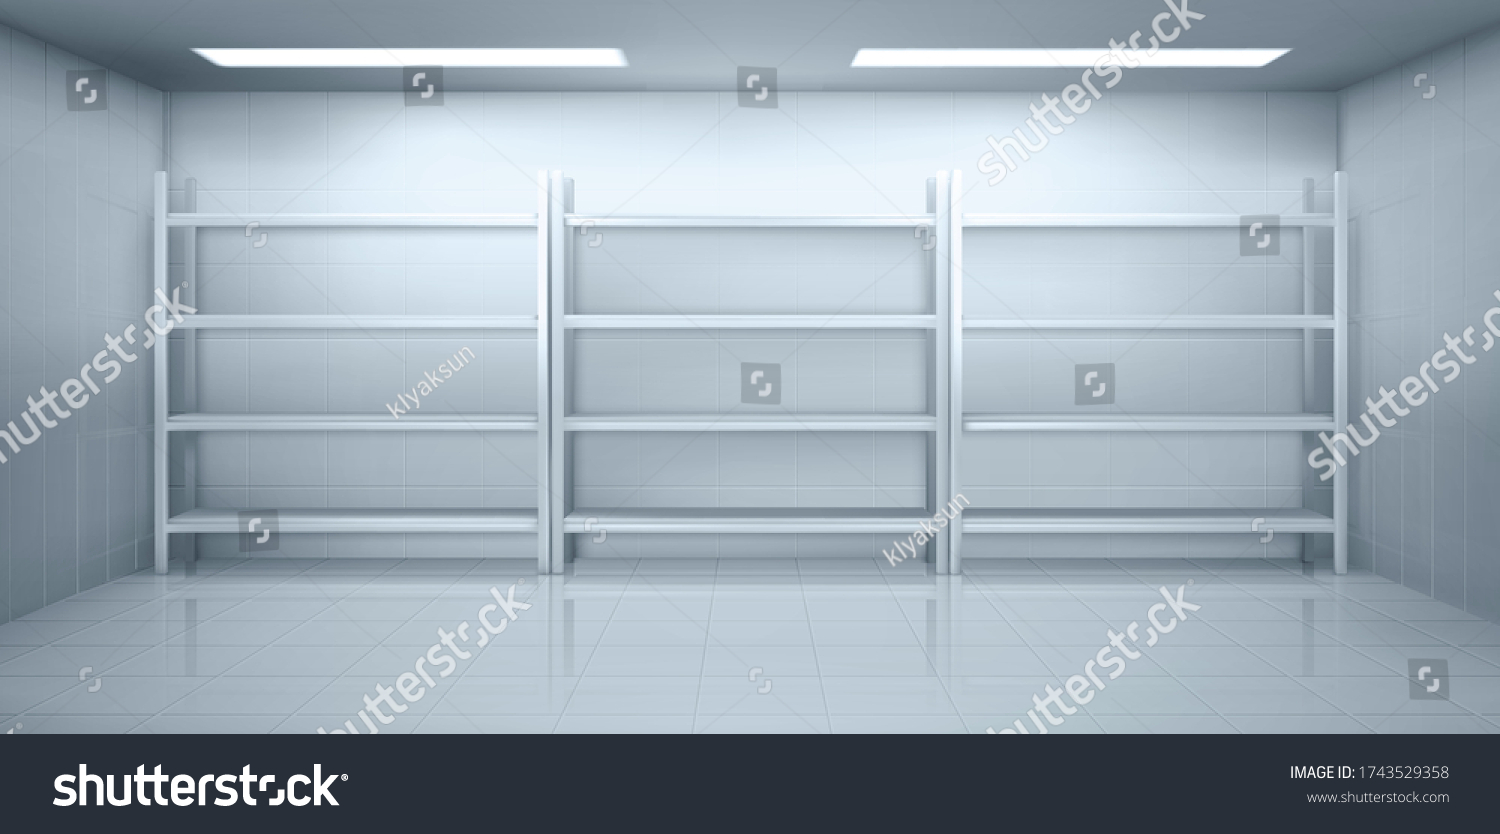 SVG of Cold room in warehouse with empty metal racks. Vector cartoon interior of industrial storage freezer with shelves, tiled walls and floor. Refrigerator chamber in factory, store or restaurant svg